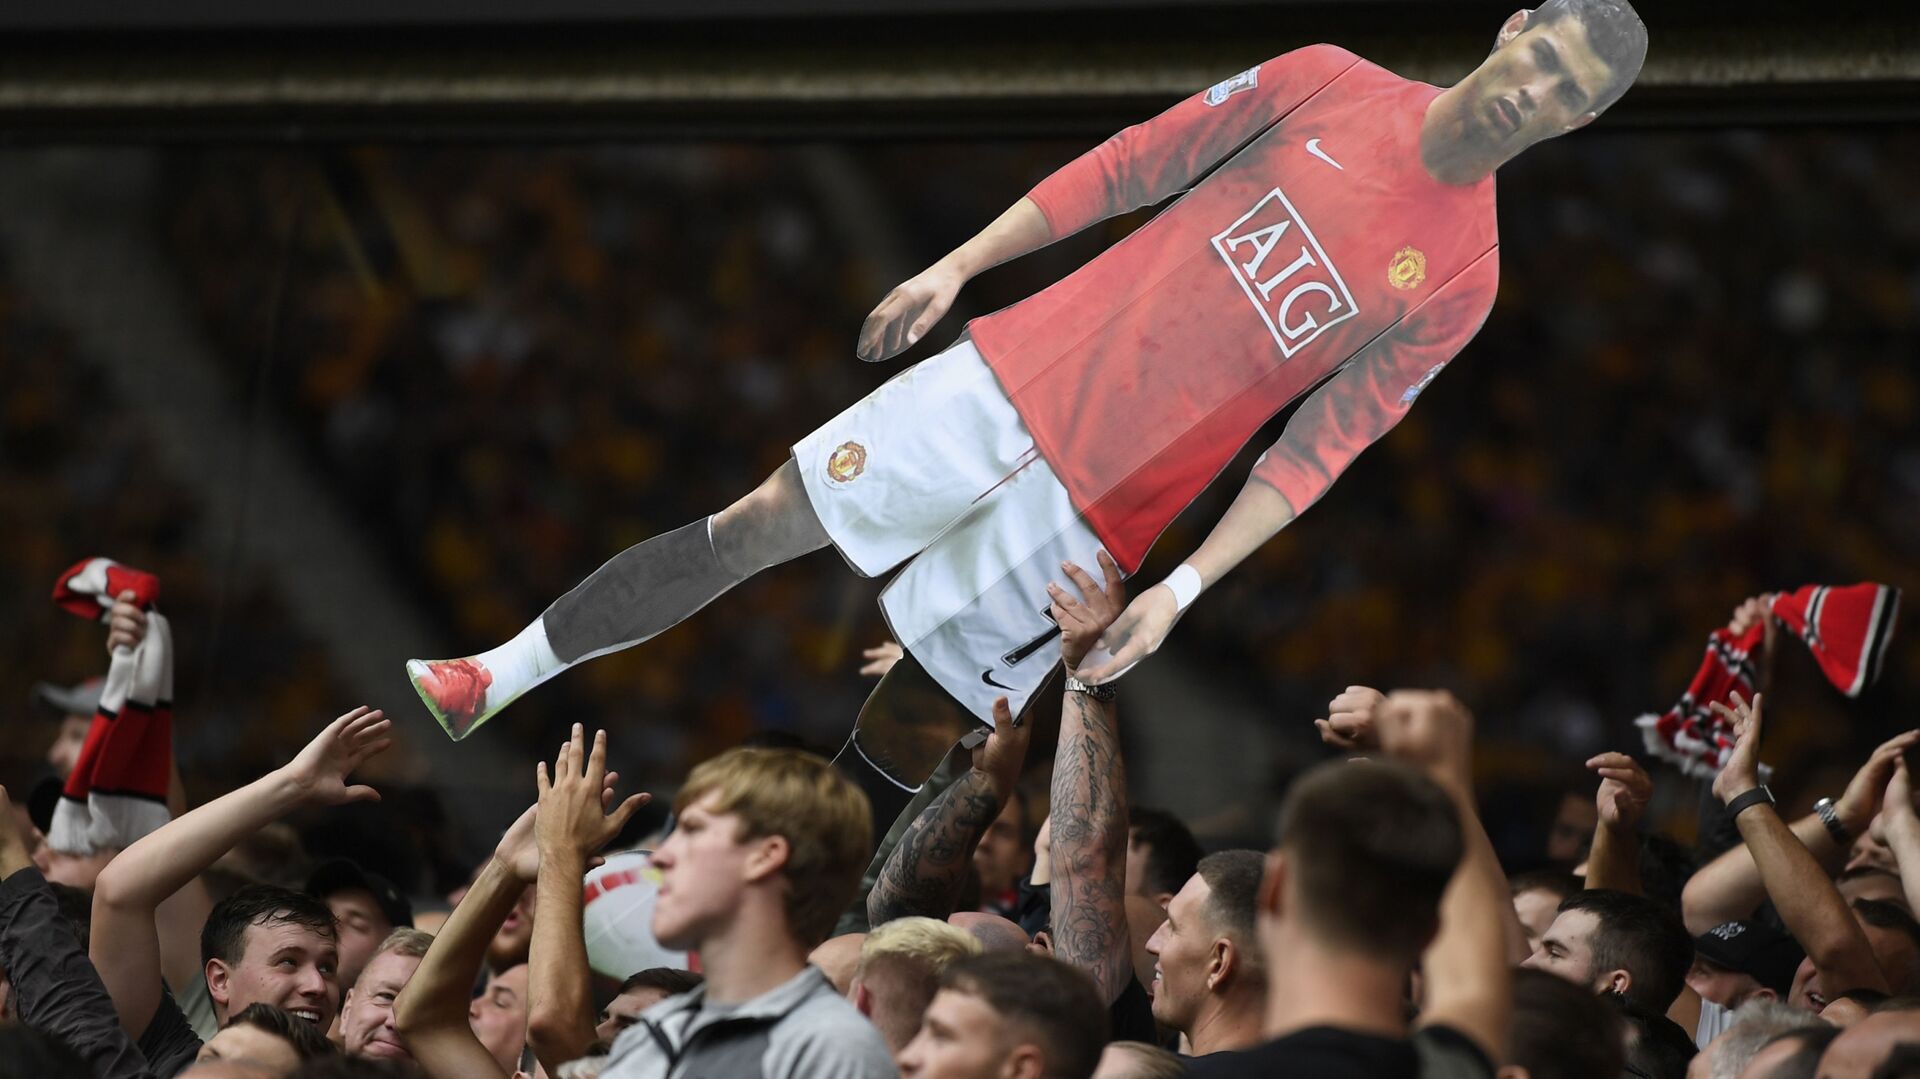 Soccer Football - Premier League - Wolverhampton Wanderers v Manchester United - Molineux Stadium, Wolverhampton, Britain - 29 August 2021 General view of Manchester United fans holding up a cardboard cut out of Cristiano Ronaldo - Sputnik International, 1920, 06.09.2021